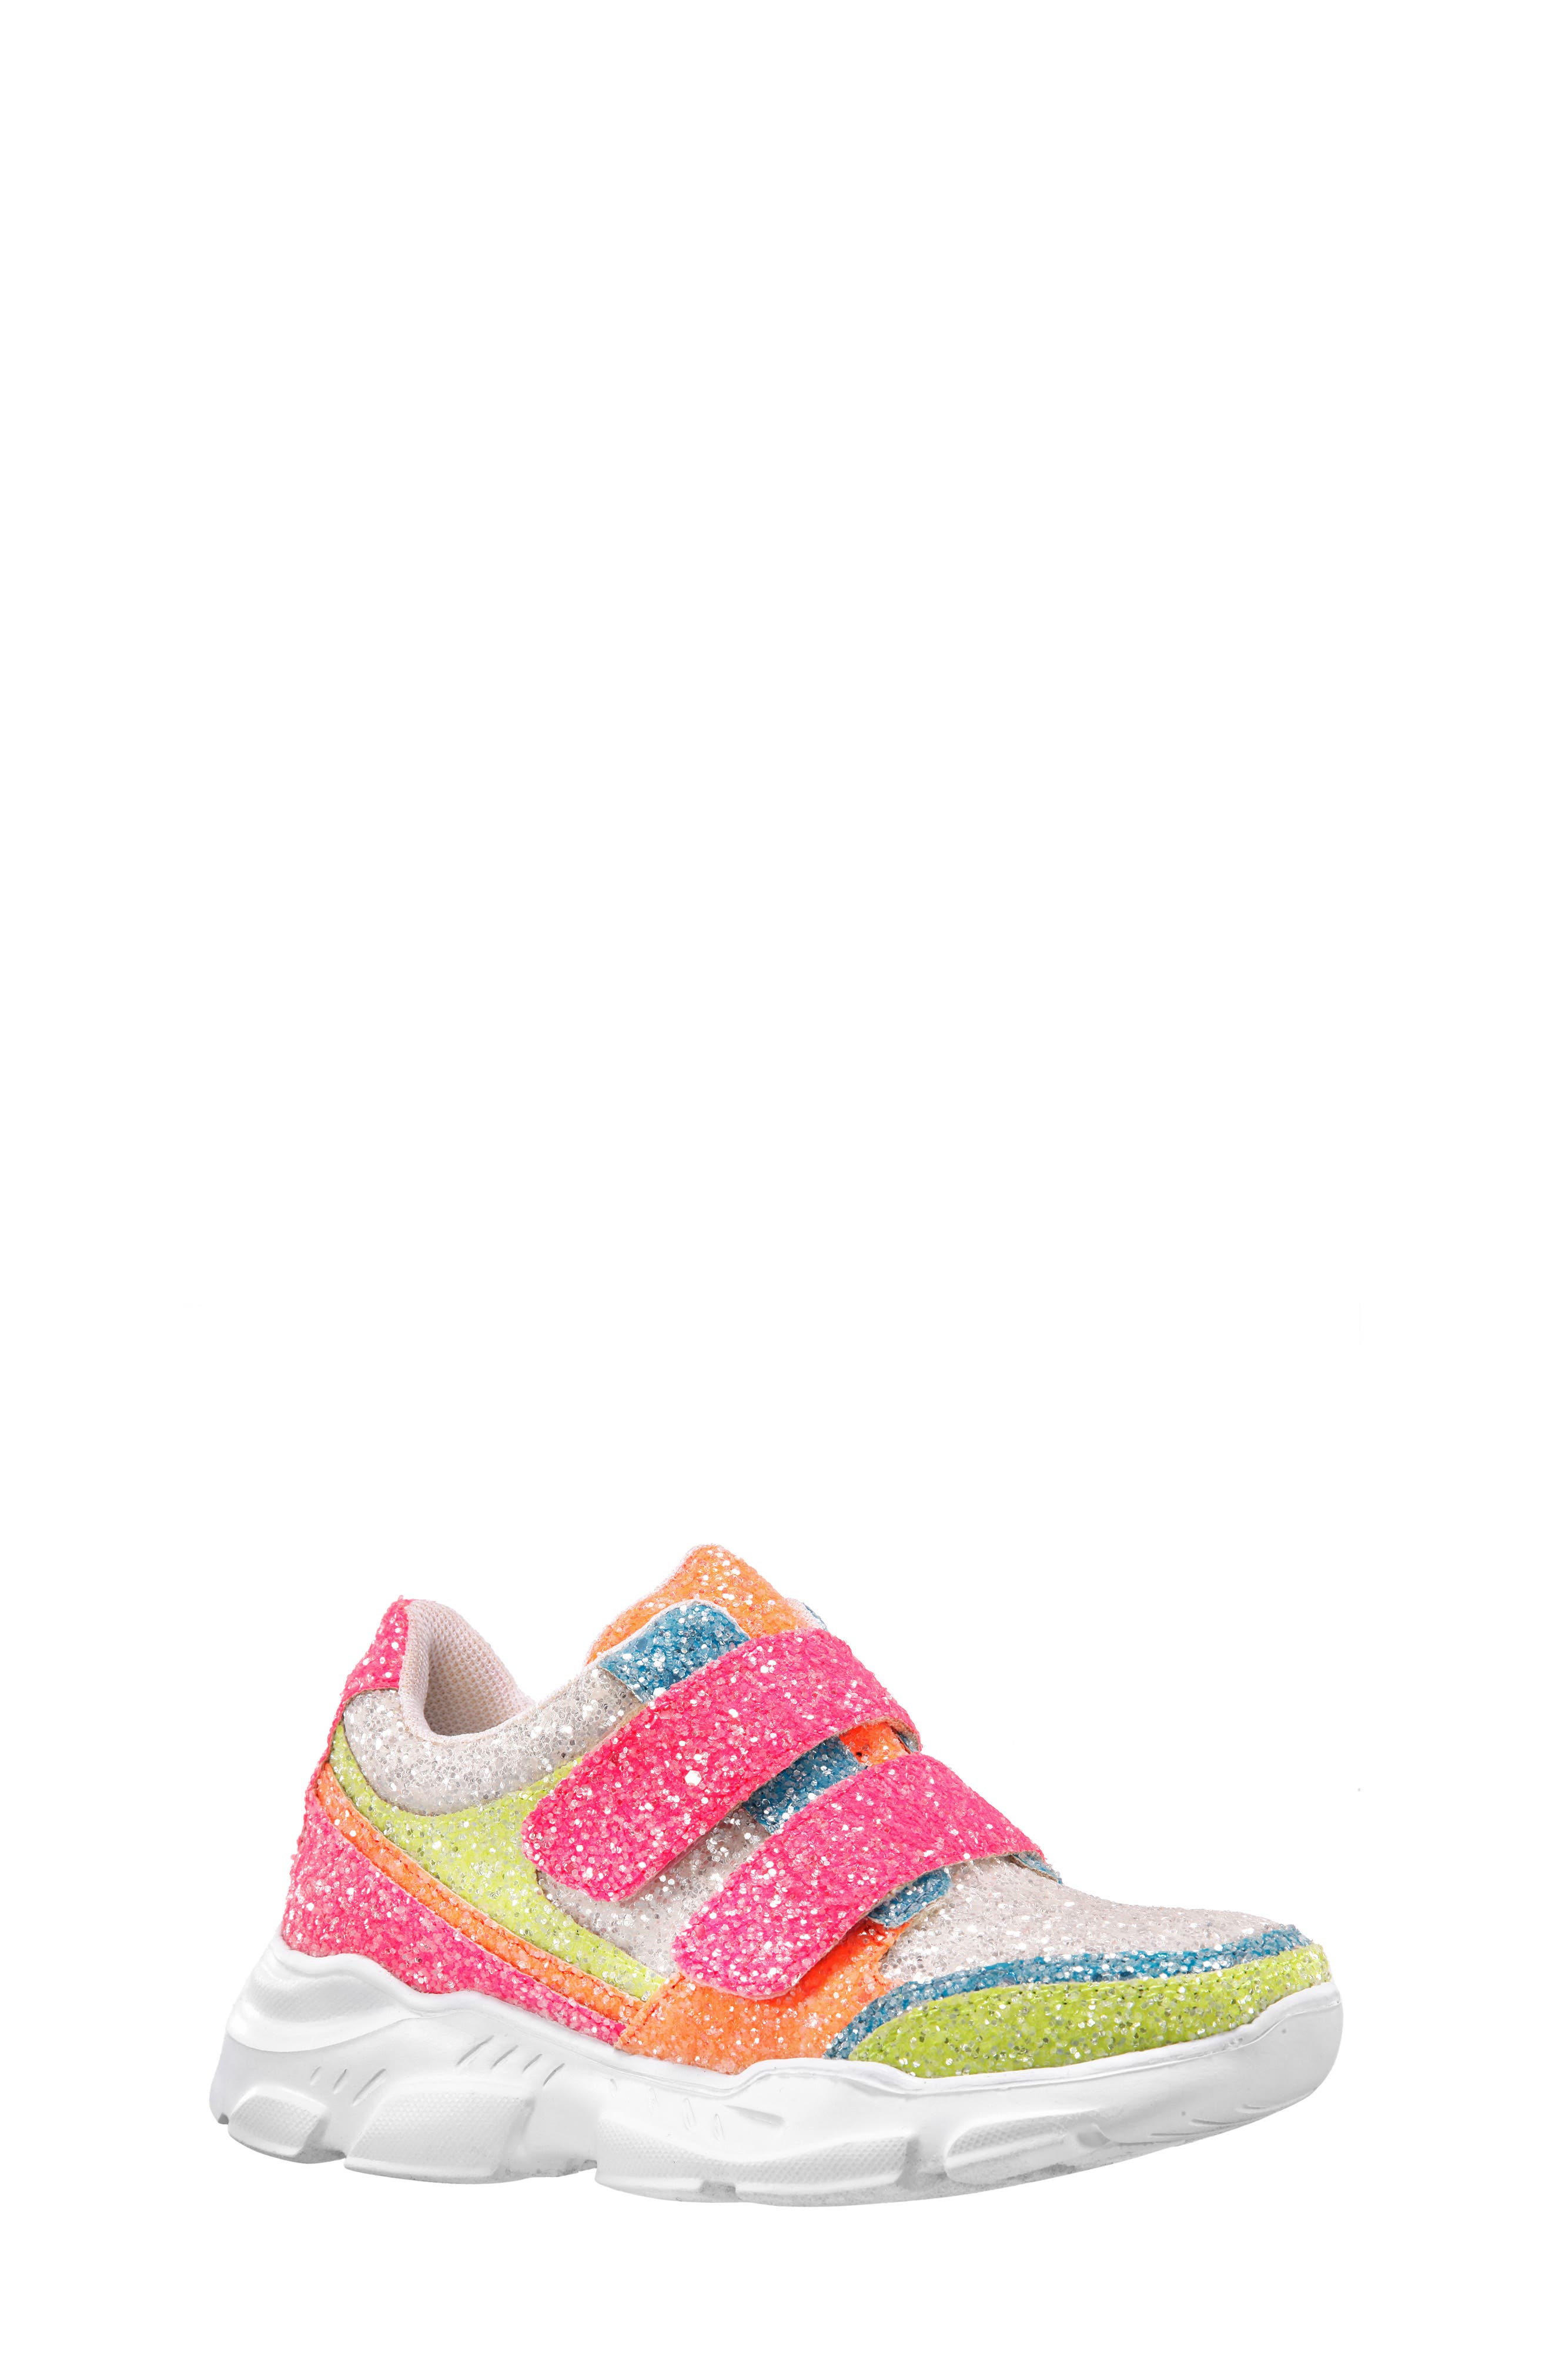 UPC 794378433262 product image for Nina Holleigh Glitter Sneaker in Neon Multi Chky Glitter at Nordstrom, Size 4 M | upcitemdb.com